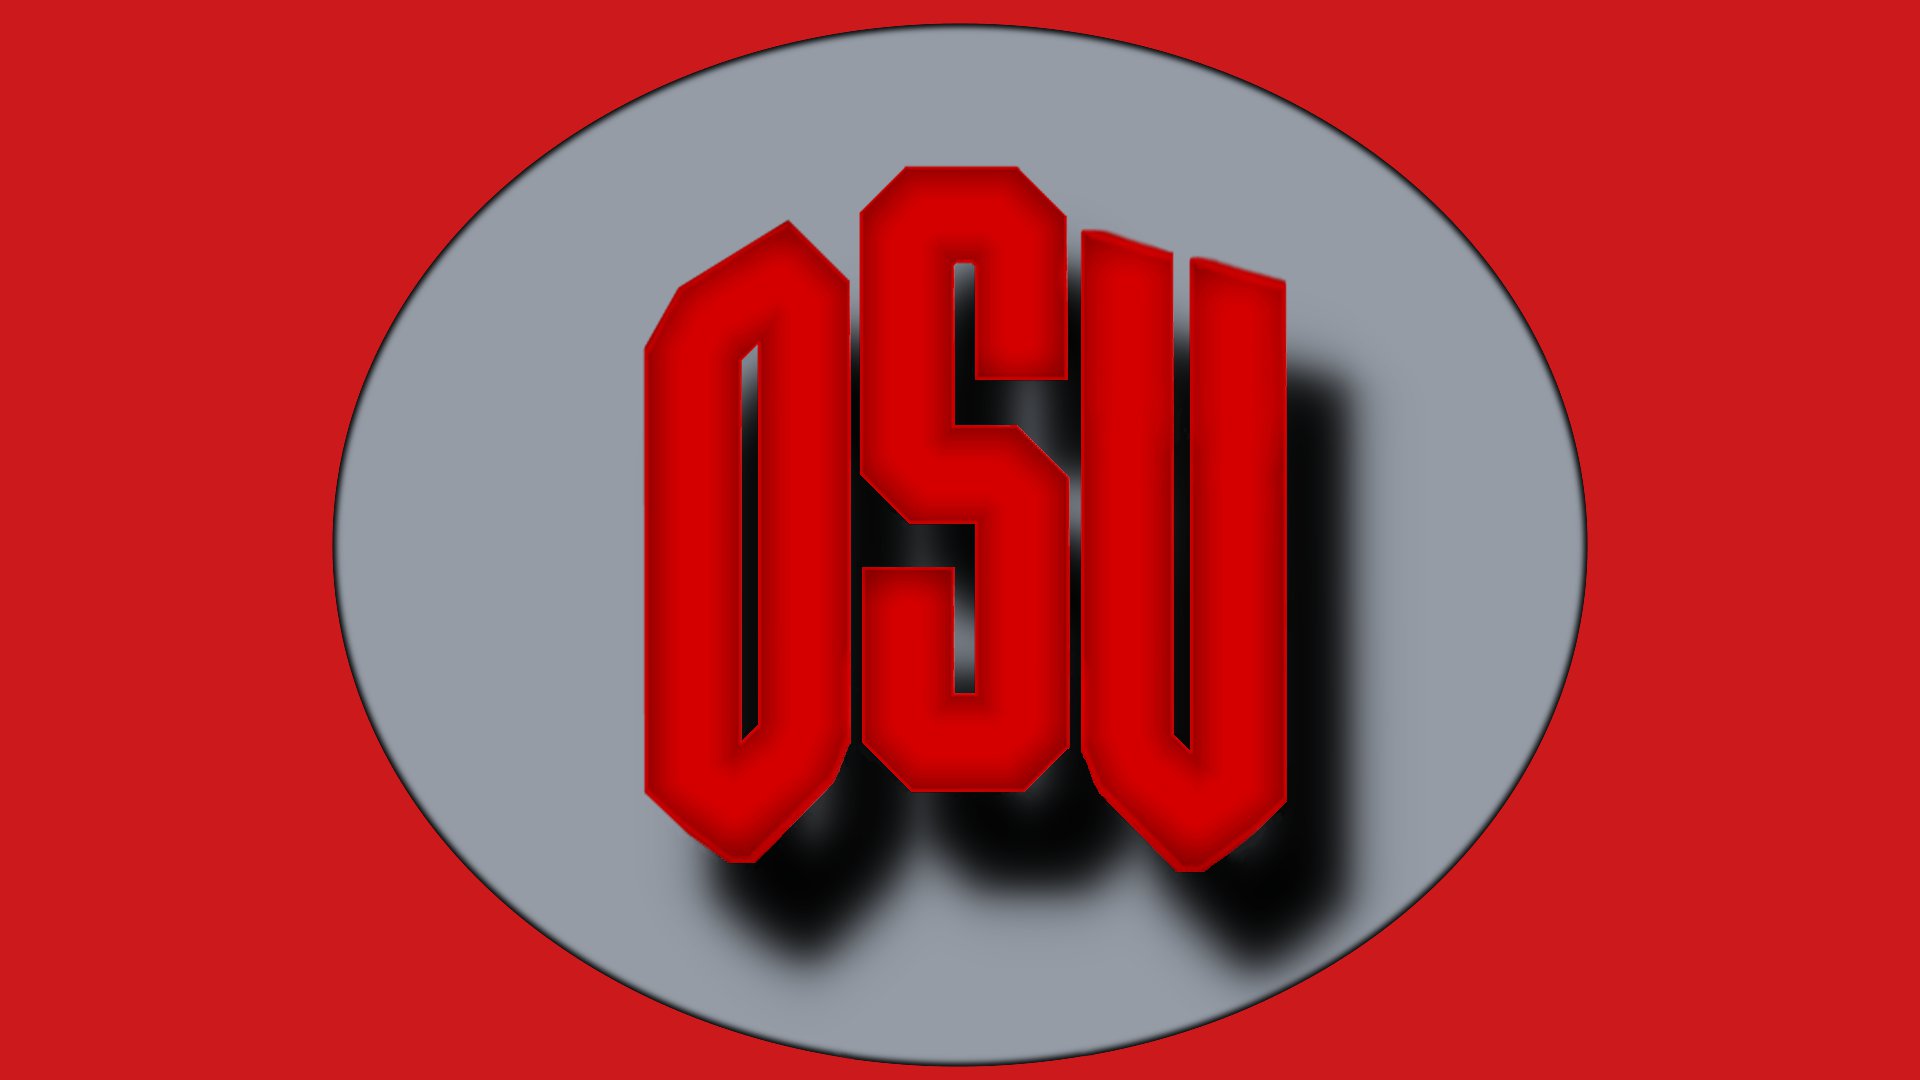 Ohio State iPhone Wallpaper 66 images